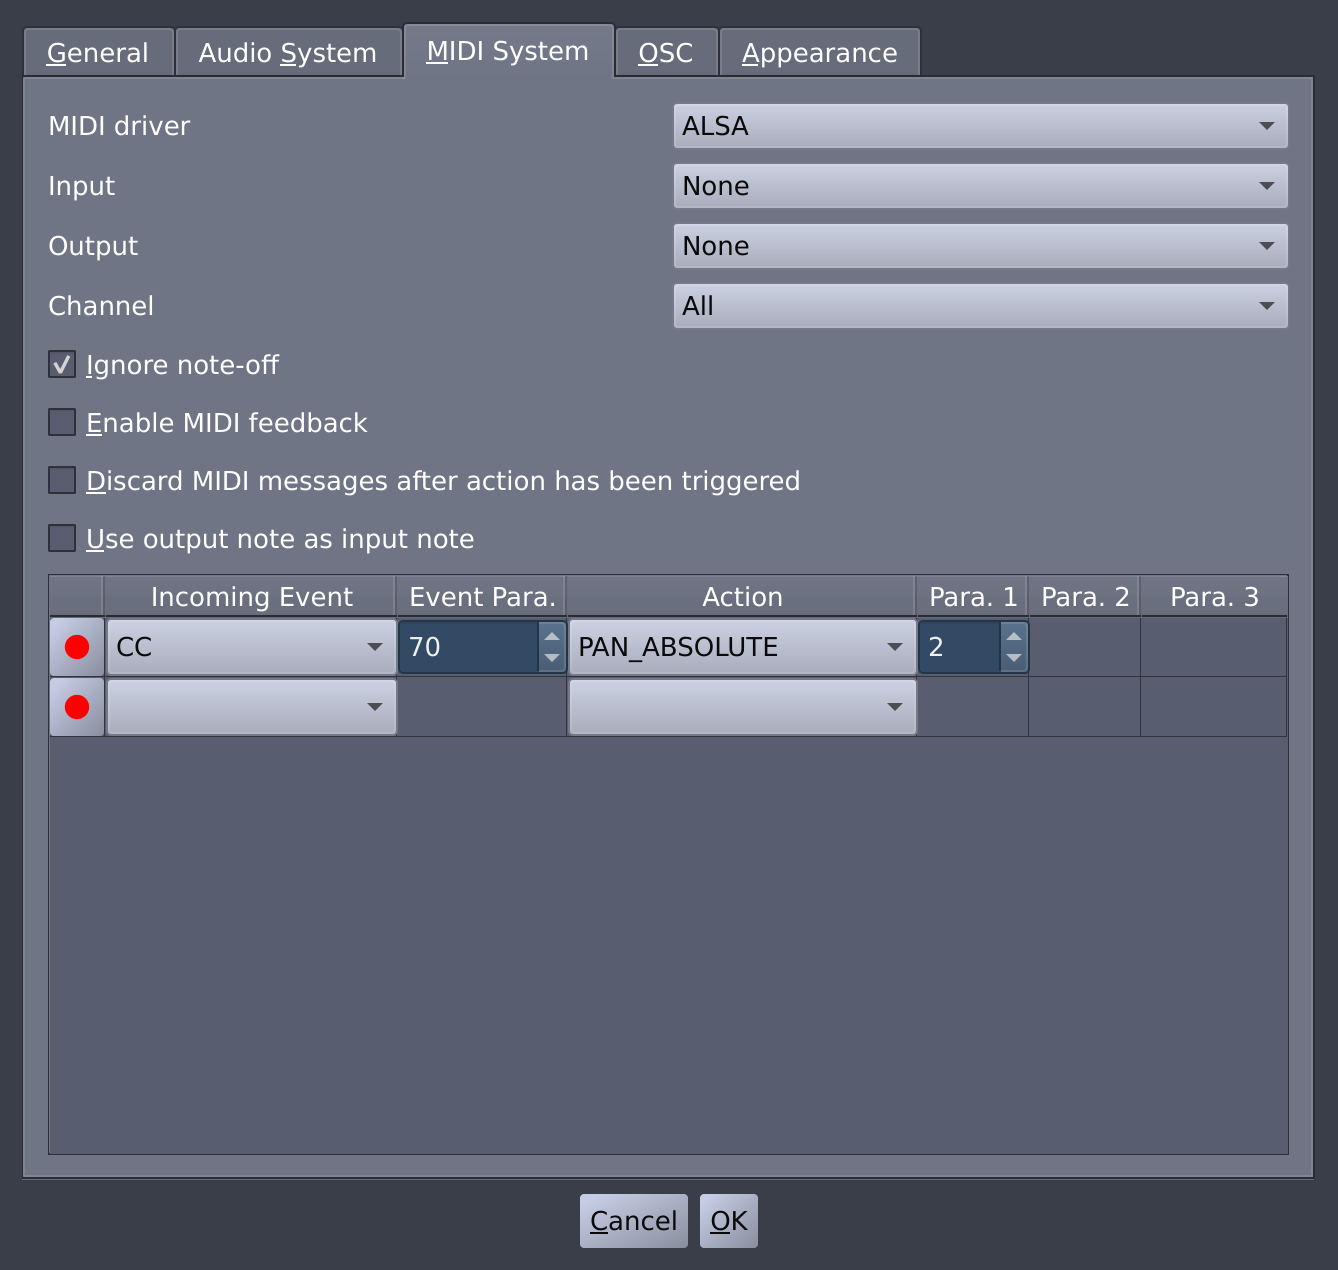 Actions are set in MIDI System tab of the Preferences Dialog